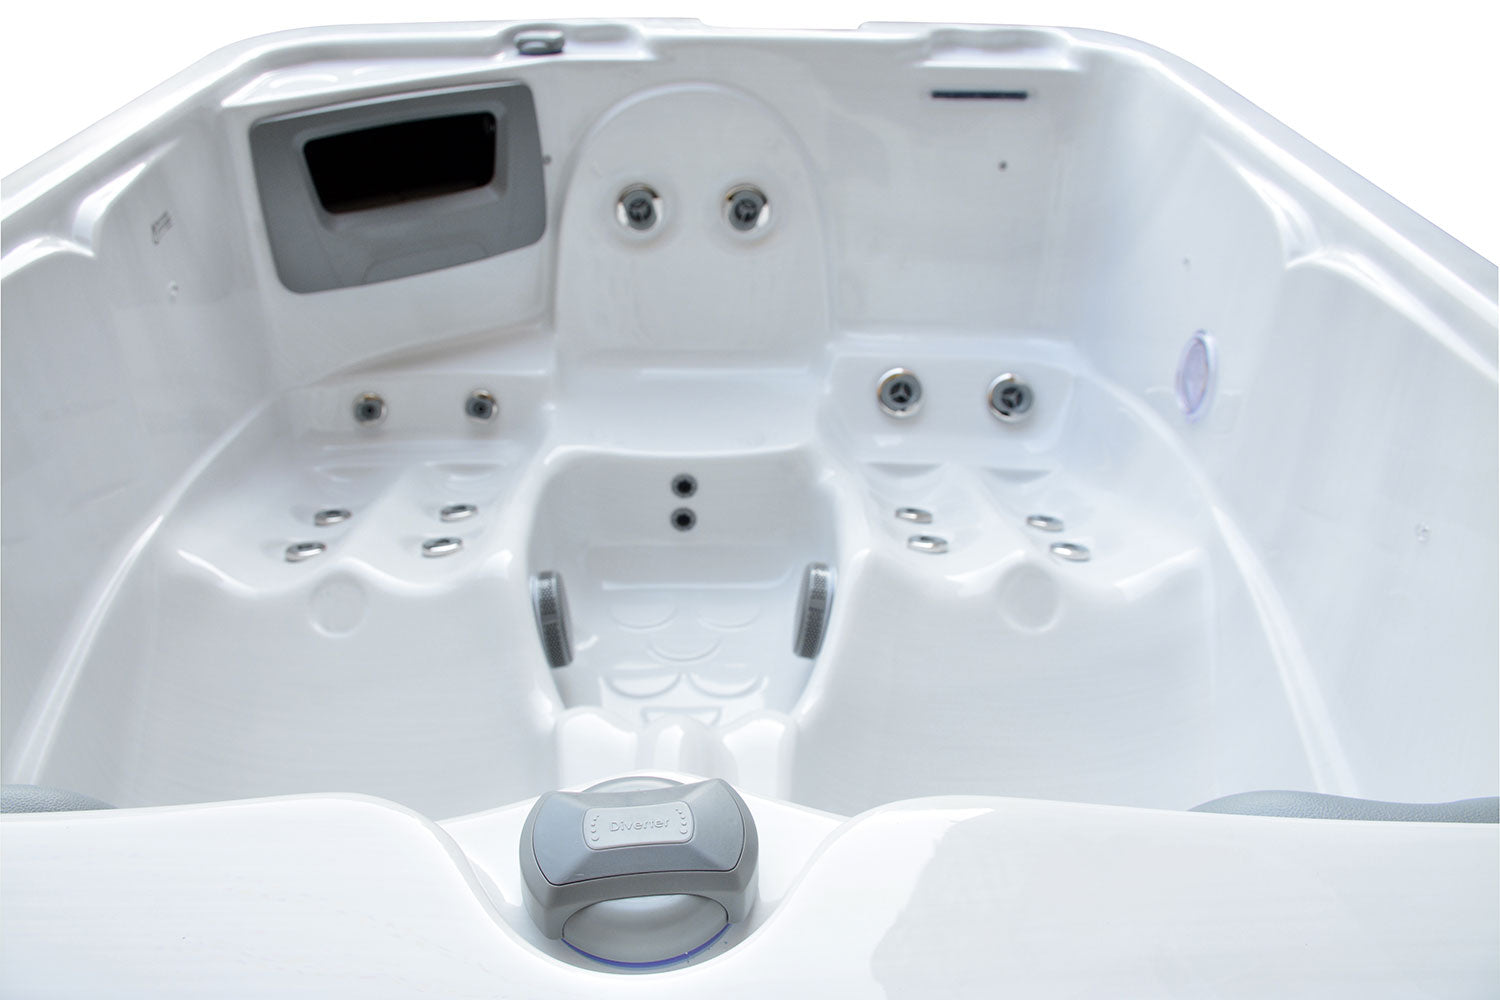 OASIS RX-170 WELLNESS HOT TUB AVAILABLE AT HOT TUB LIVERPOOL 